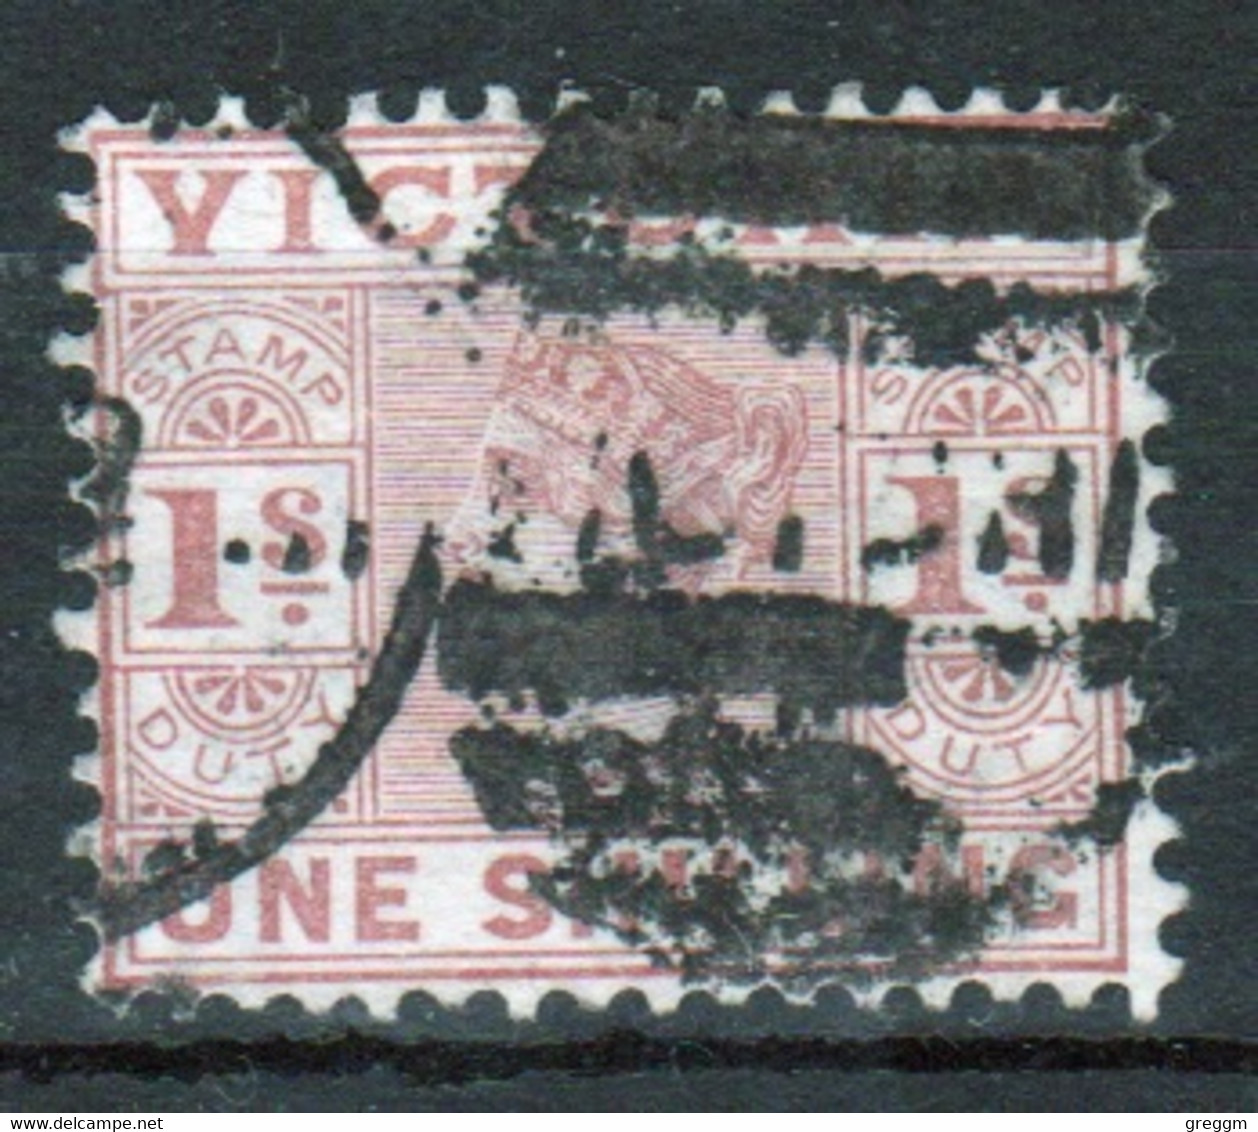 Australia 1886 Queen Victoria One Shilling Stamp Duty Revenue Fiscally Cancelled In Good Condition. - Revenue Stamps